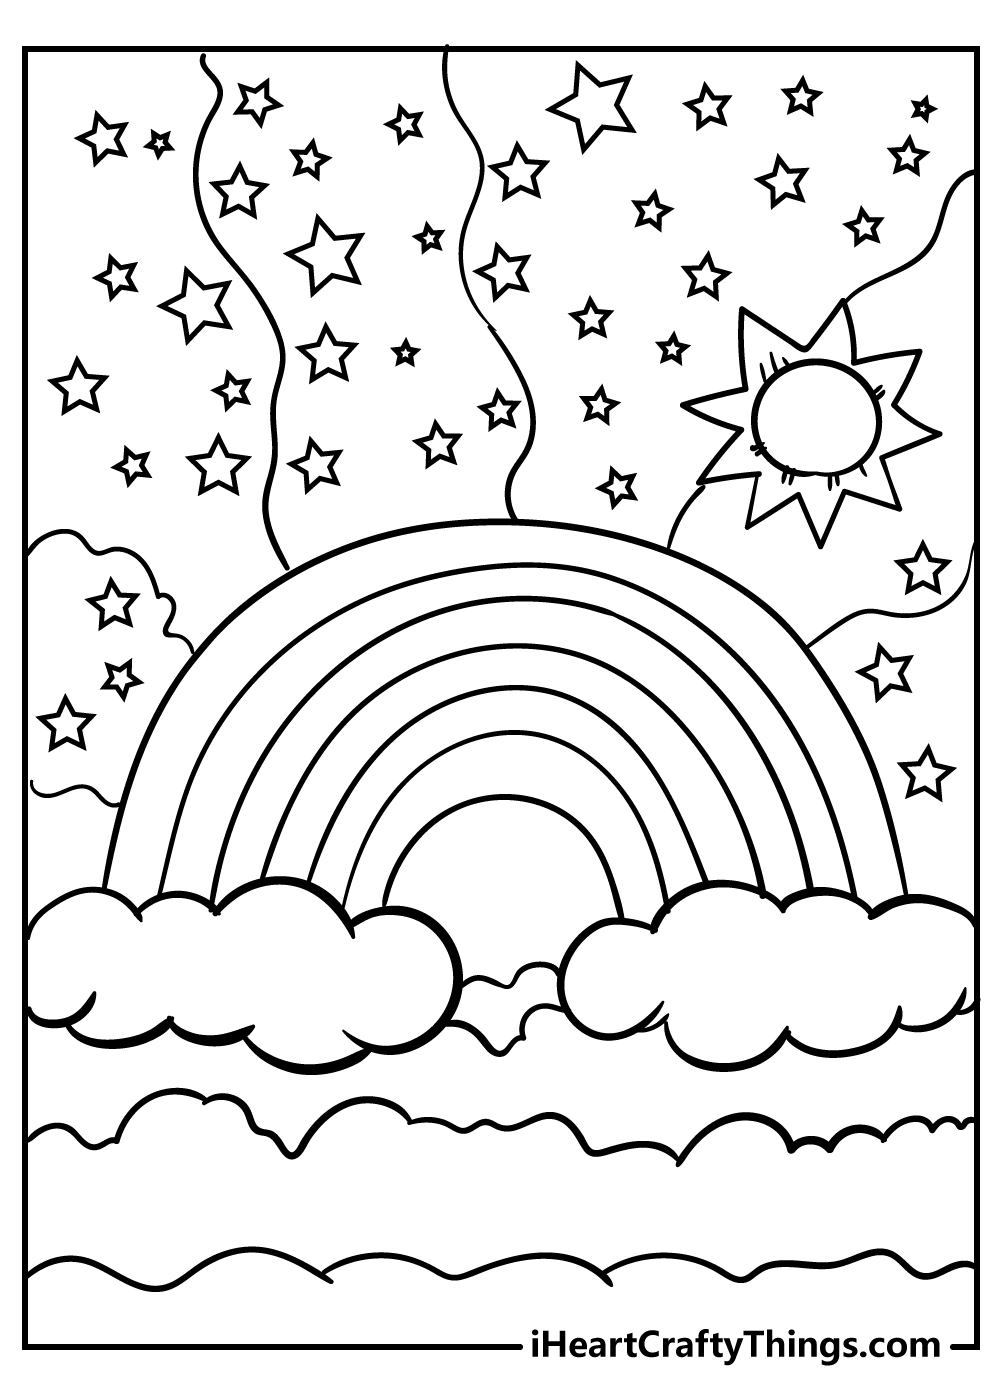 Rainbow coloring pages free printables